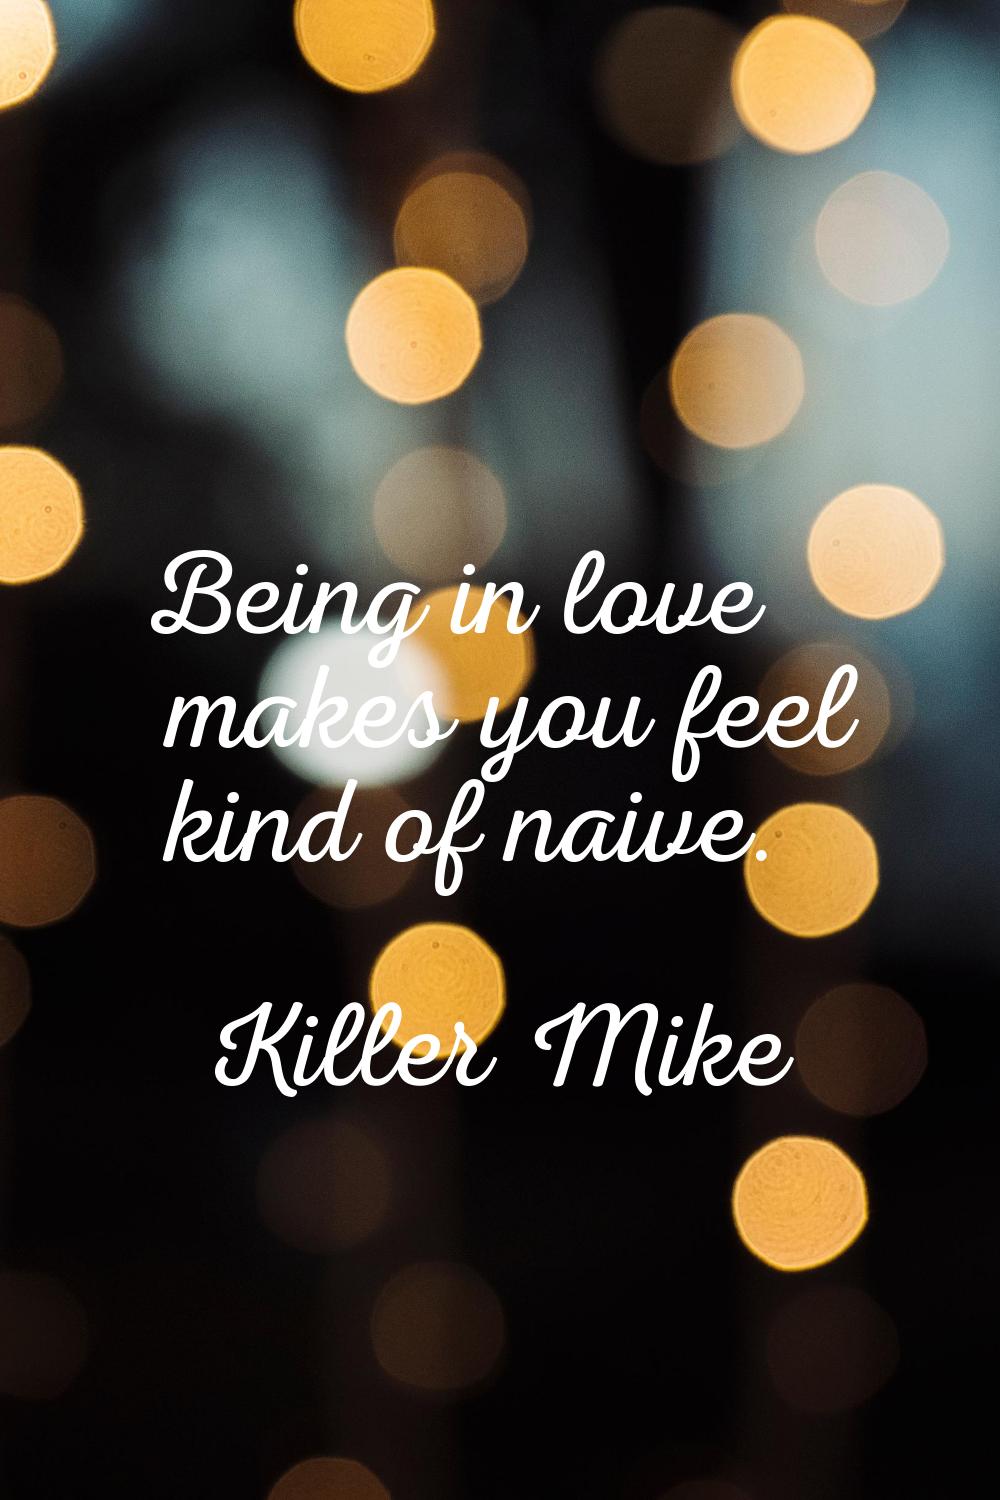 Being in love makes you feel kind of naive.